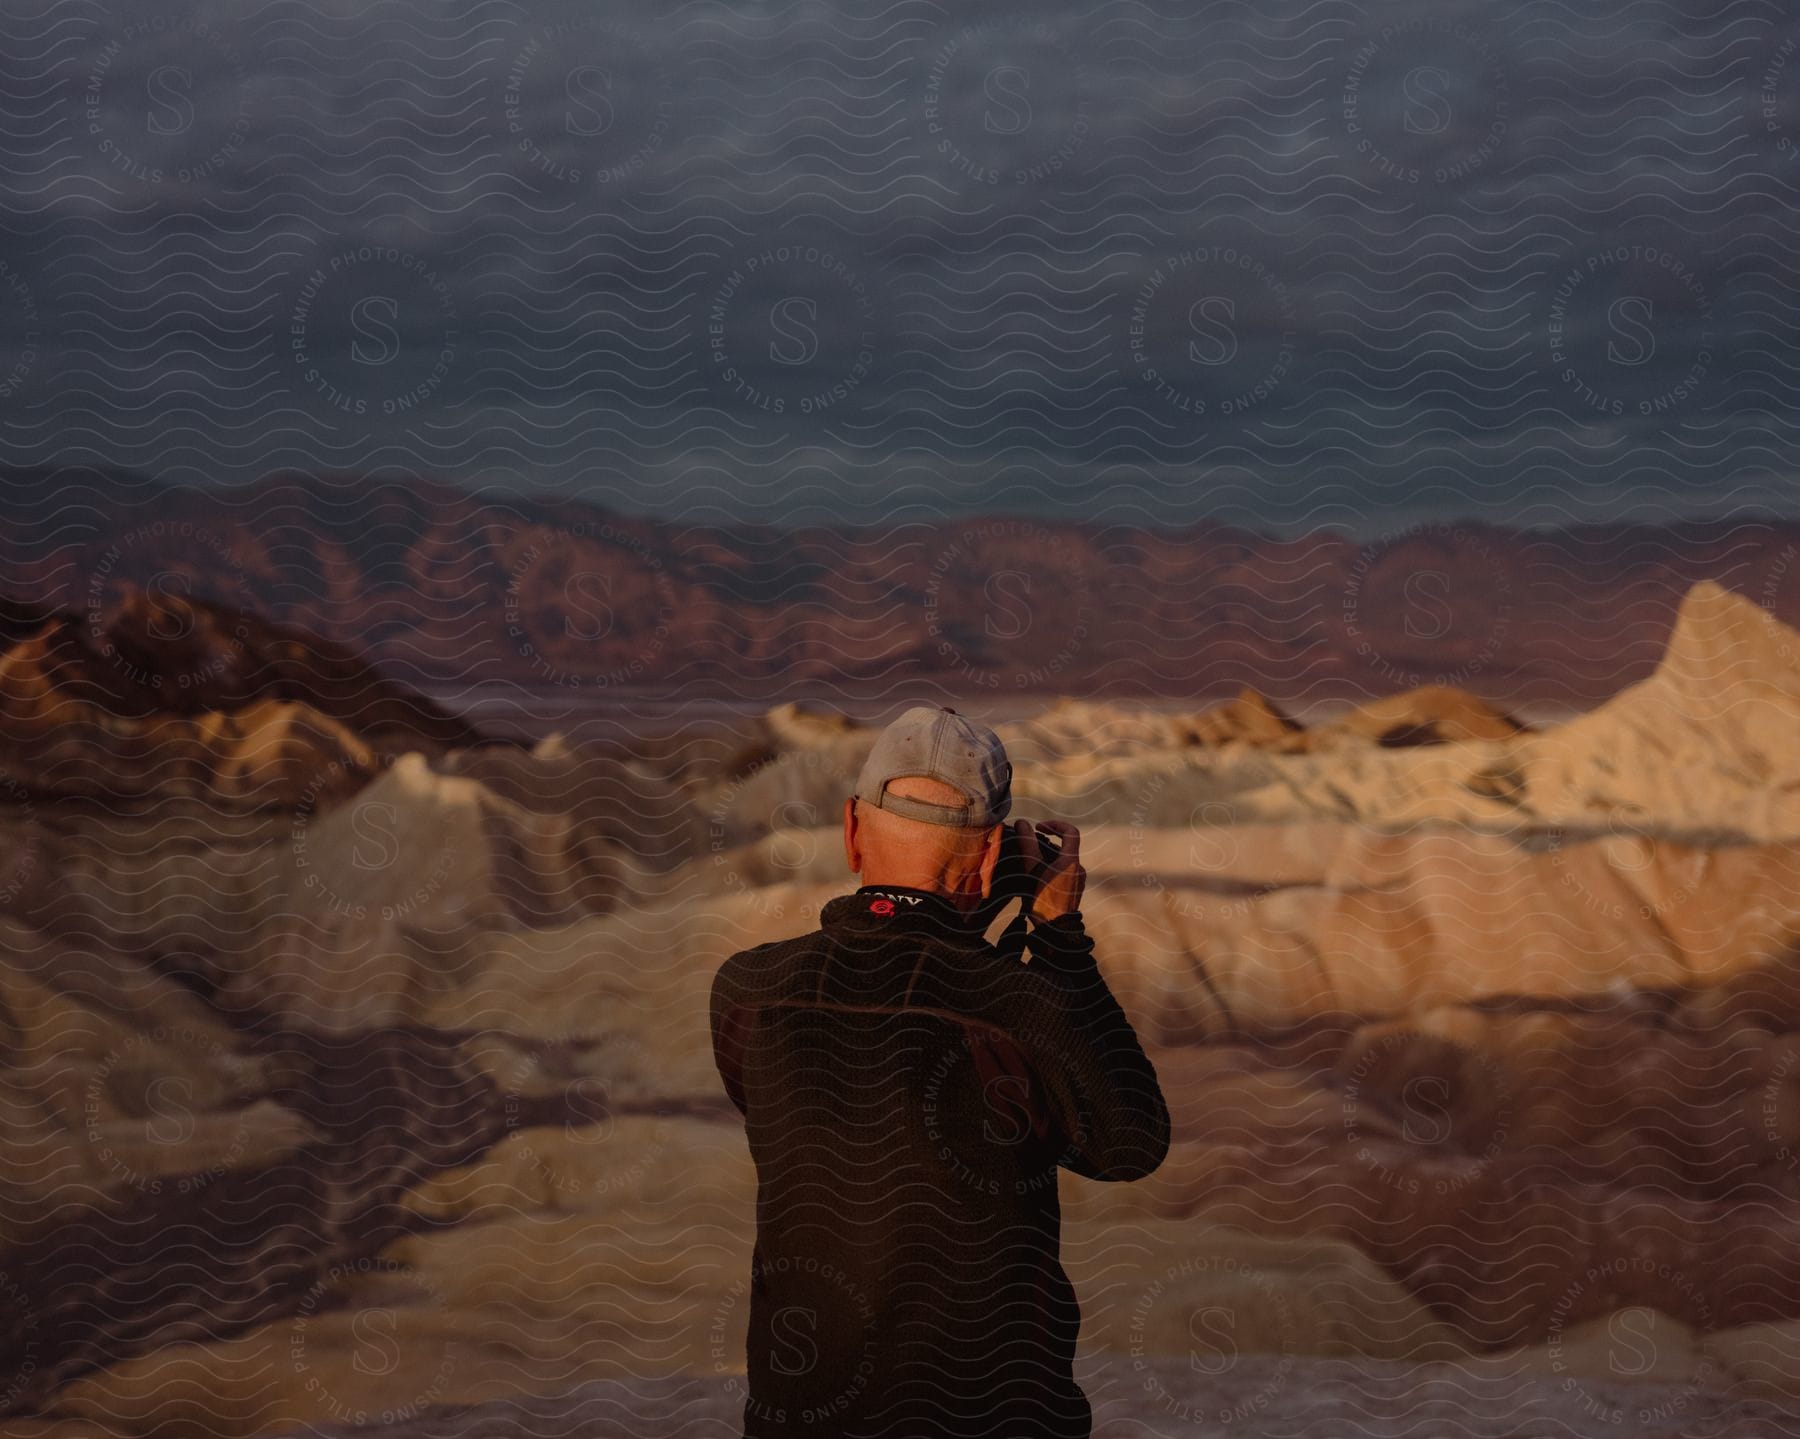 A photographer photographing the desert landscape of the canyons during sunset.